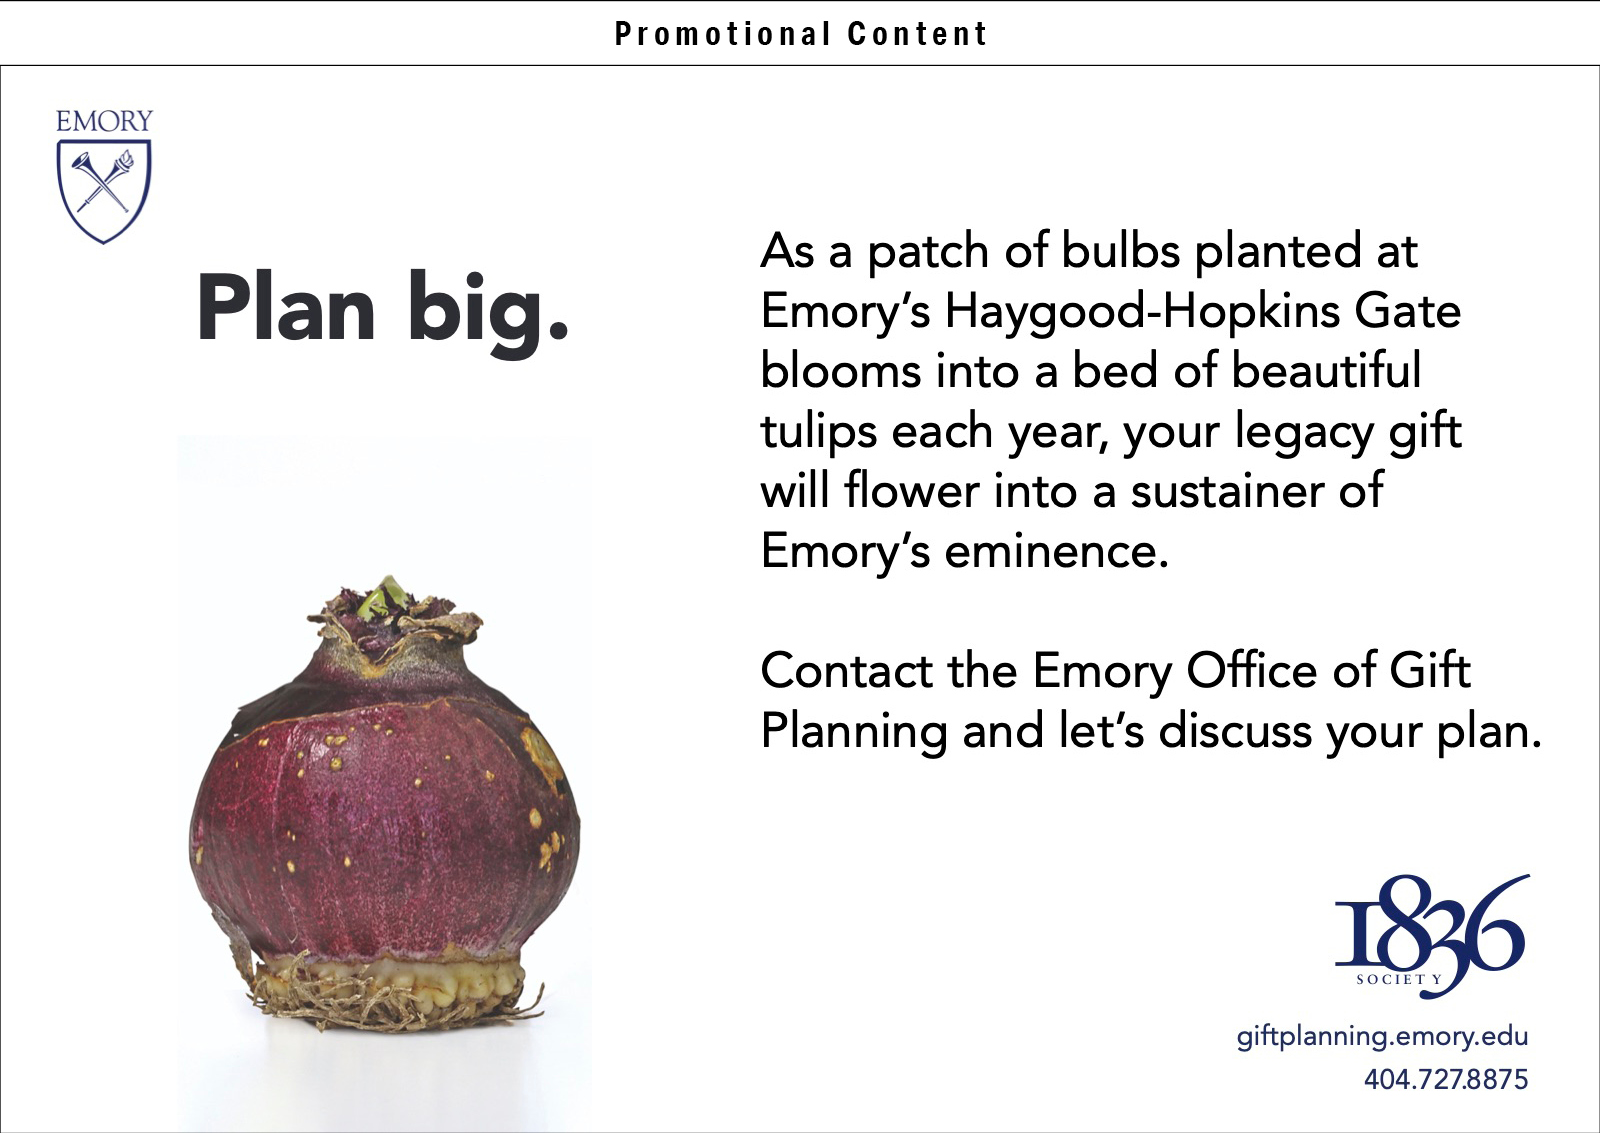 As a patch of bulbs planted at Emory’s Haygood-Hopkins Gate blooms into a bed of beautiful tulips each year, your legacy gift will flower into a sustainer of Emory’s eminence. Contact the Emory Office of Gift Planning and let’s discuss your plan.